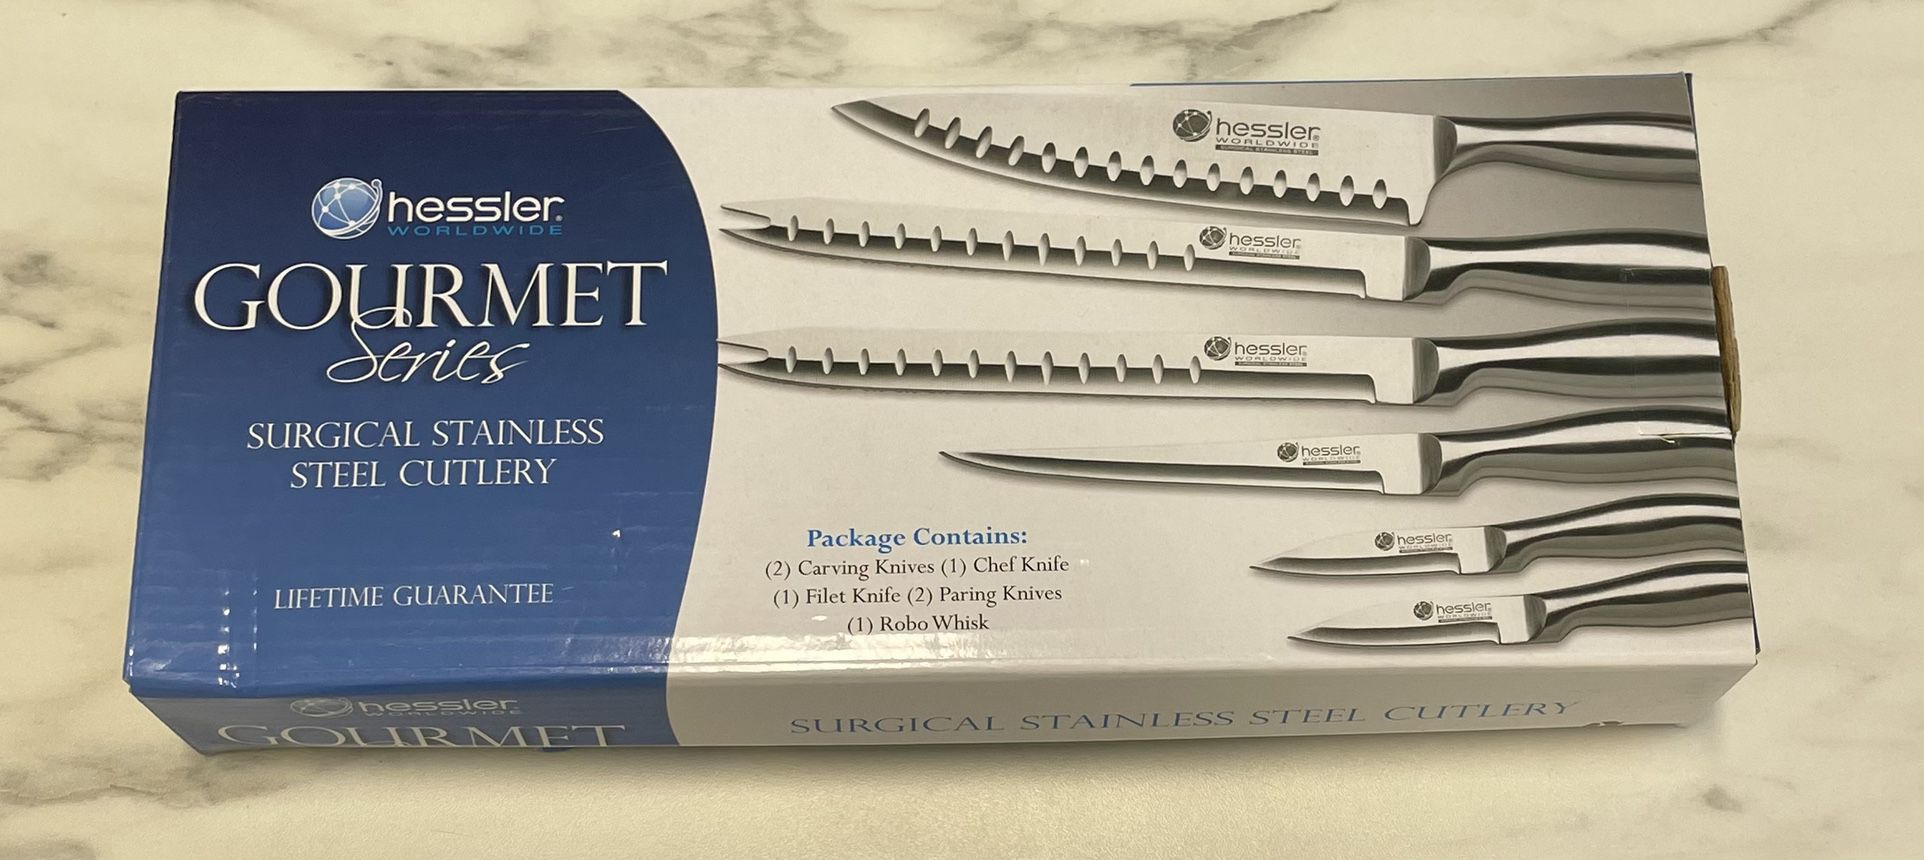 Hessler Chef Series Surgical Stainless Steel Cutlery 7 Piece Knife